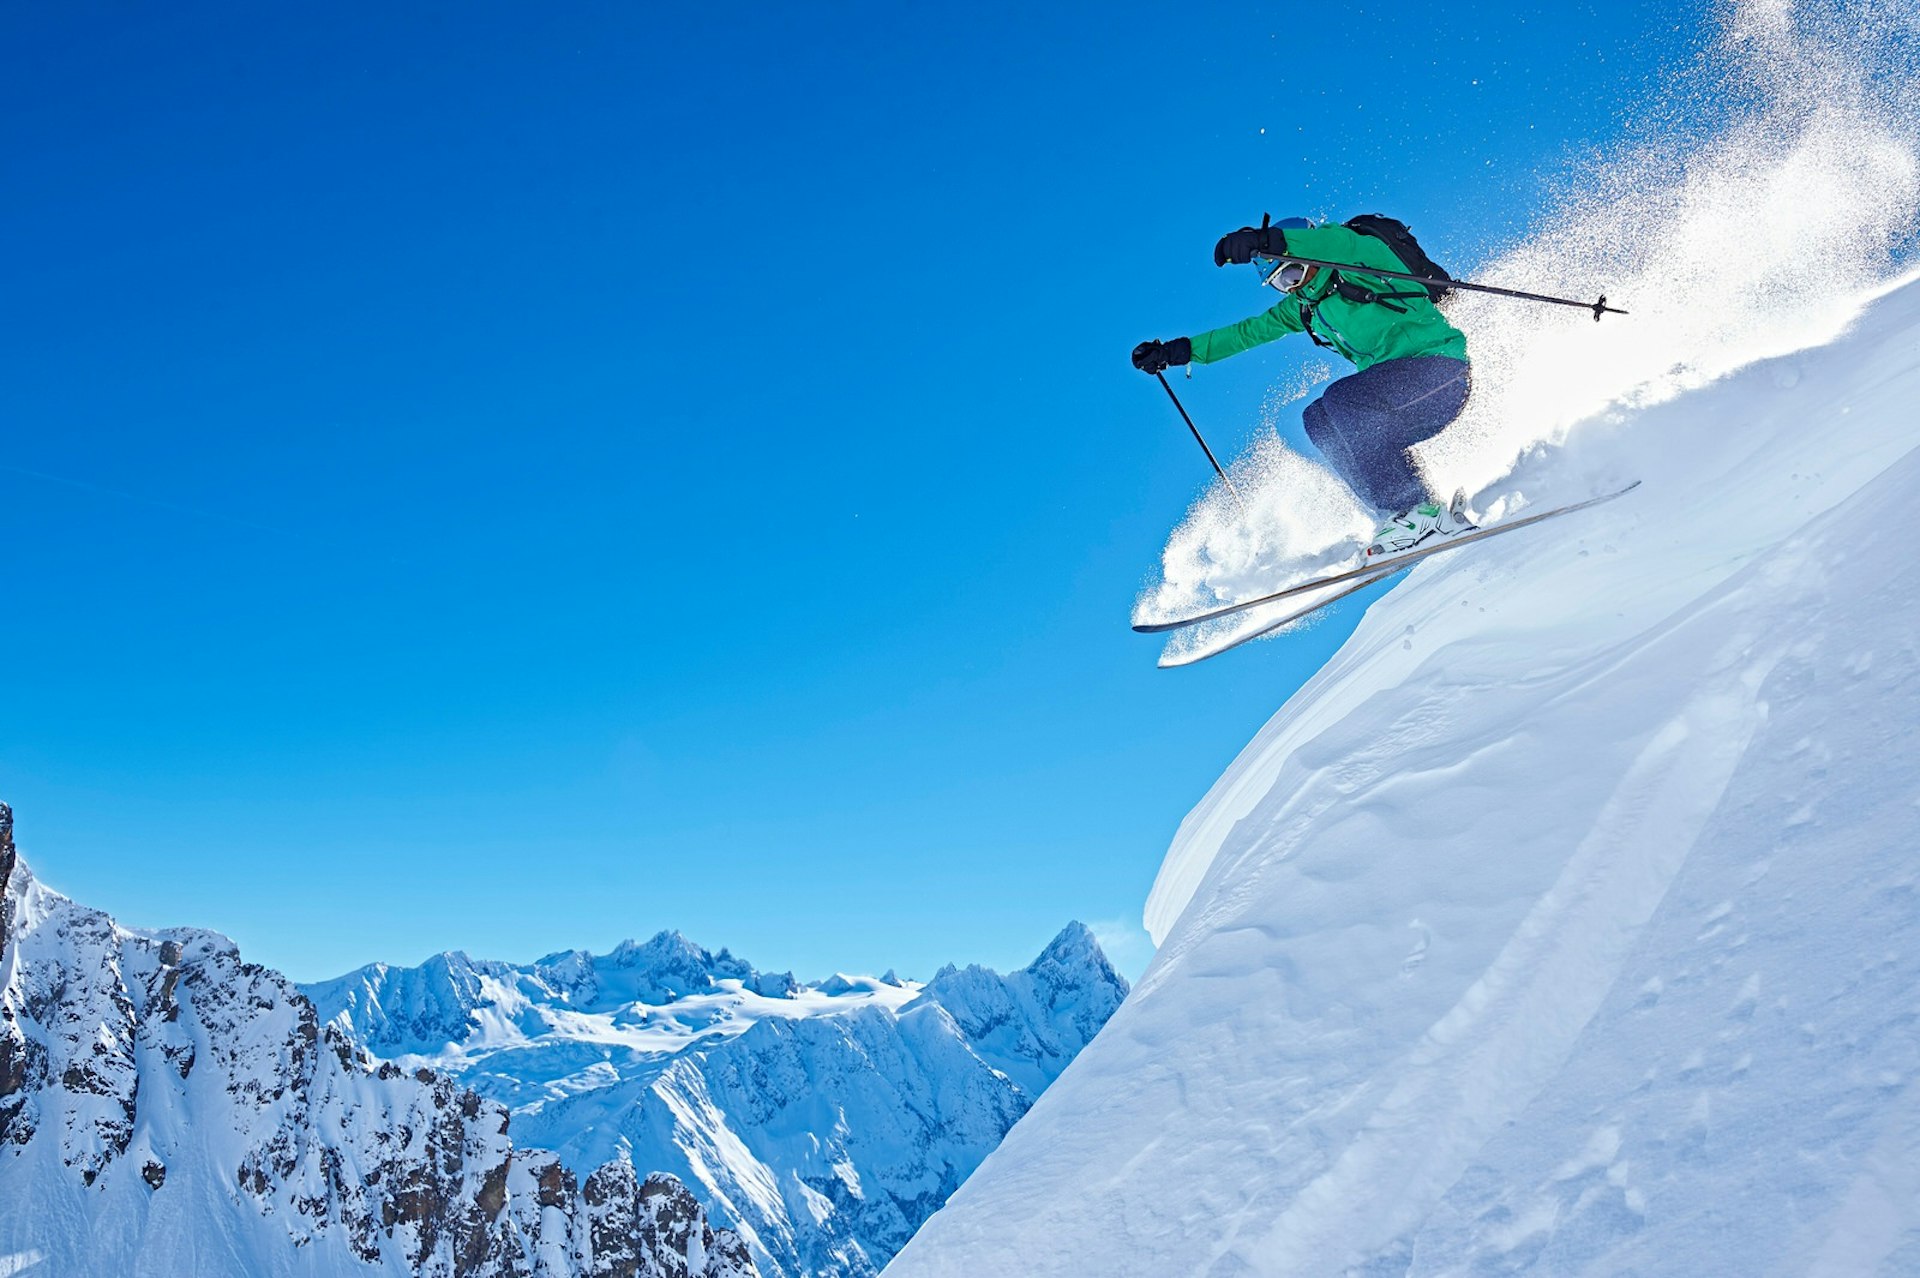 A skier launches into the air on the slopes of Chamonix, with snow-capped mountains beyond.